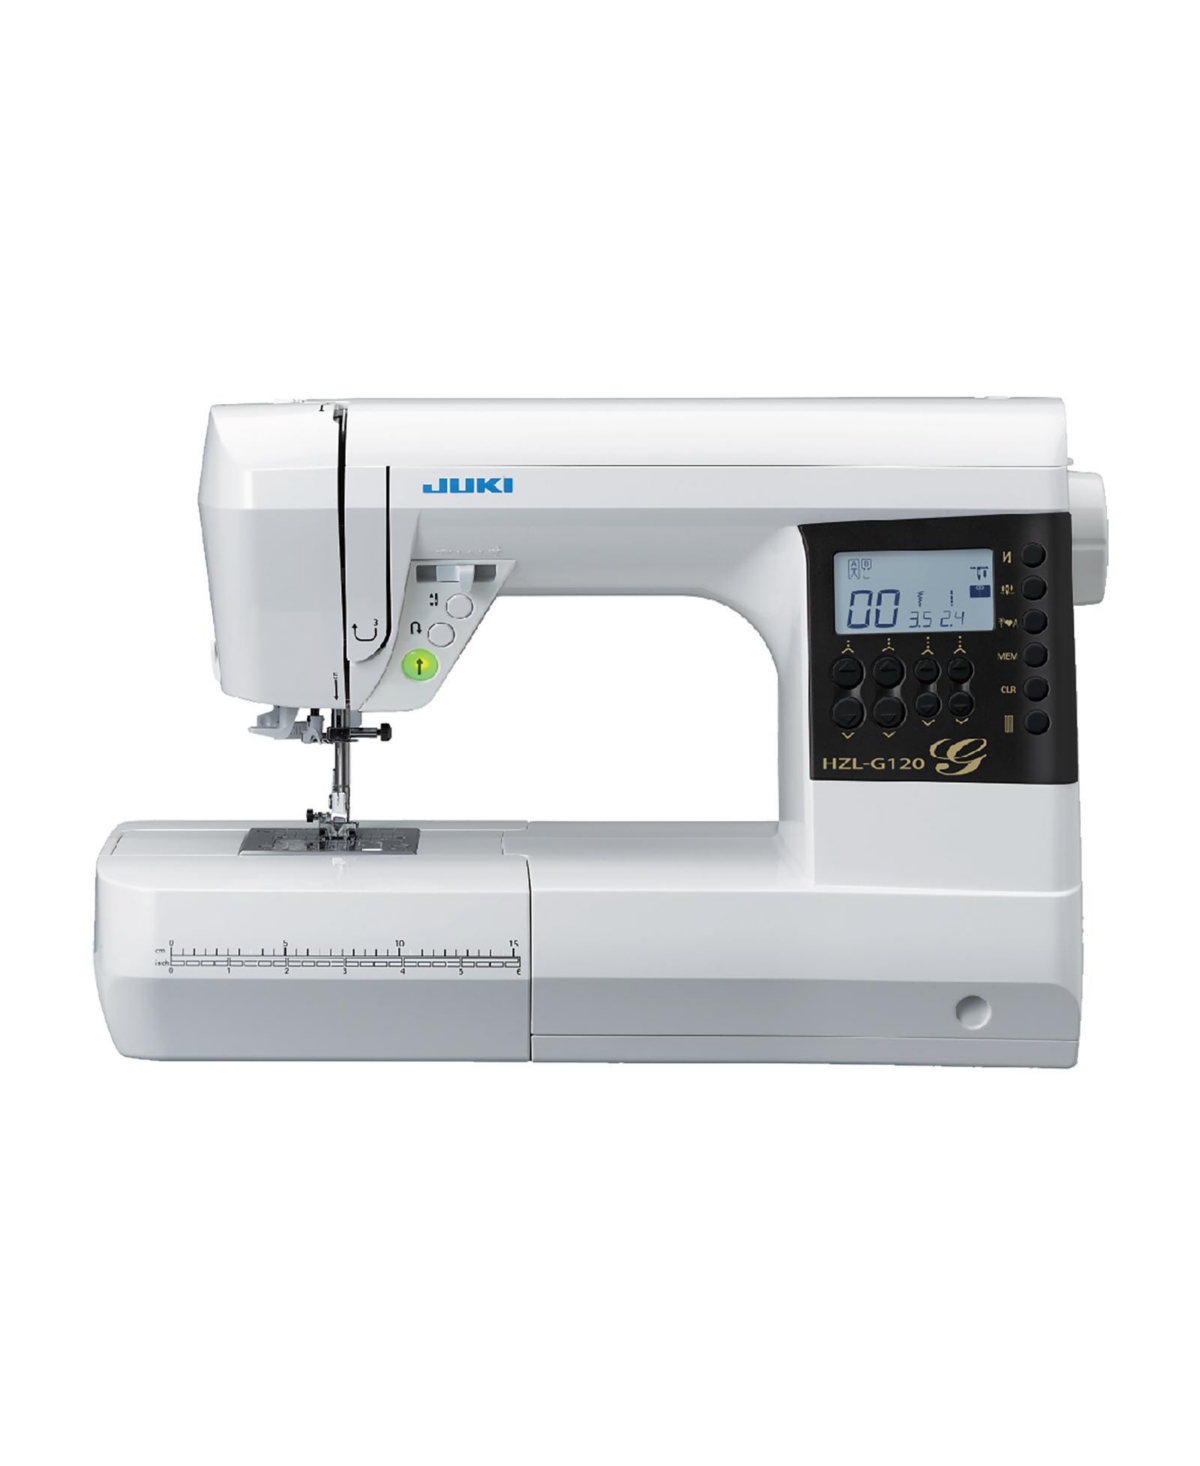 Hzl-G120 Computerized Sewing and Quilting Machine - White